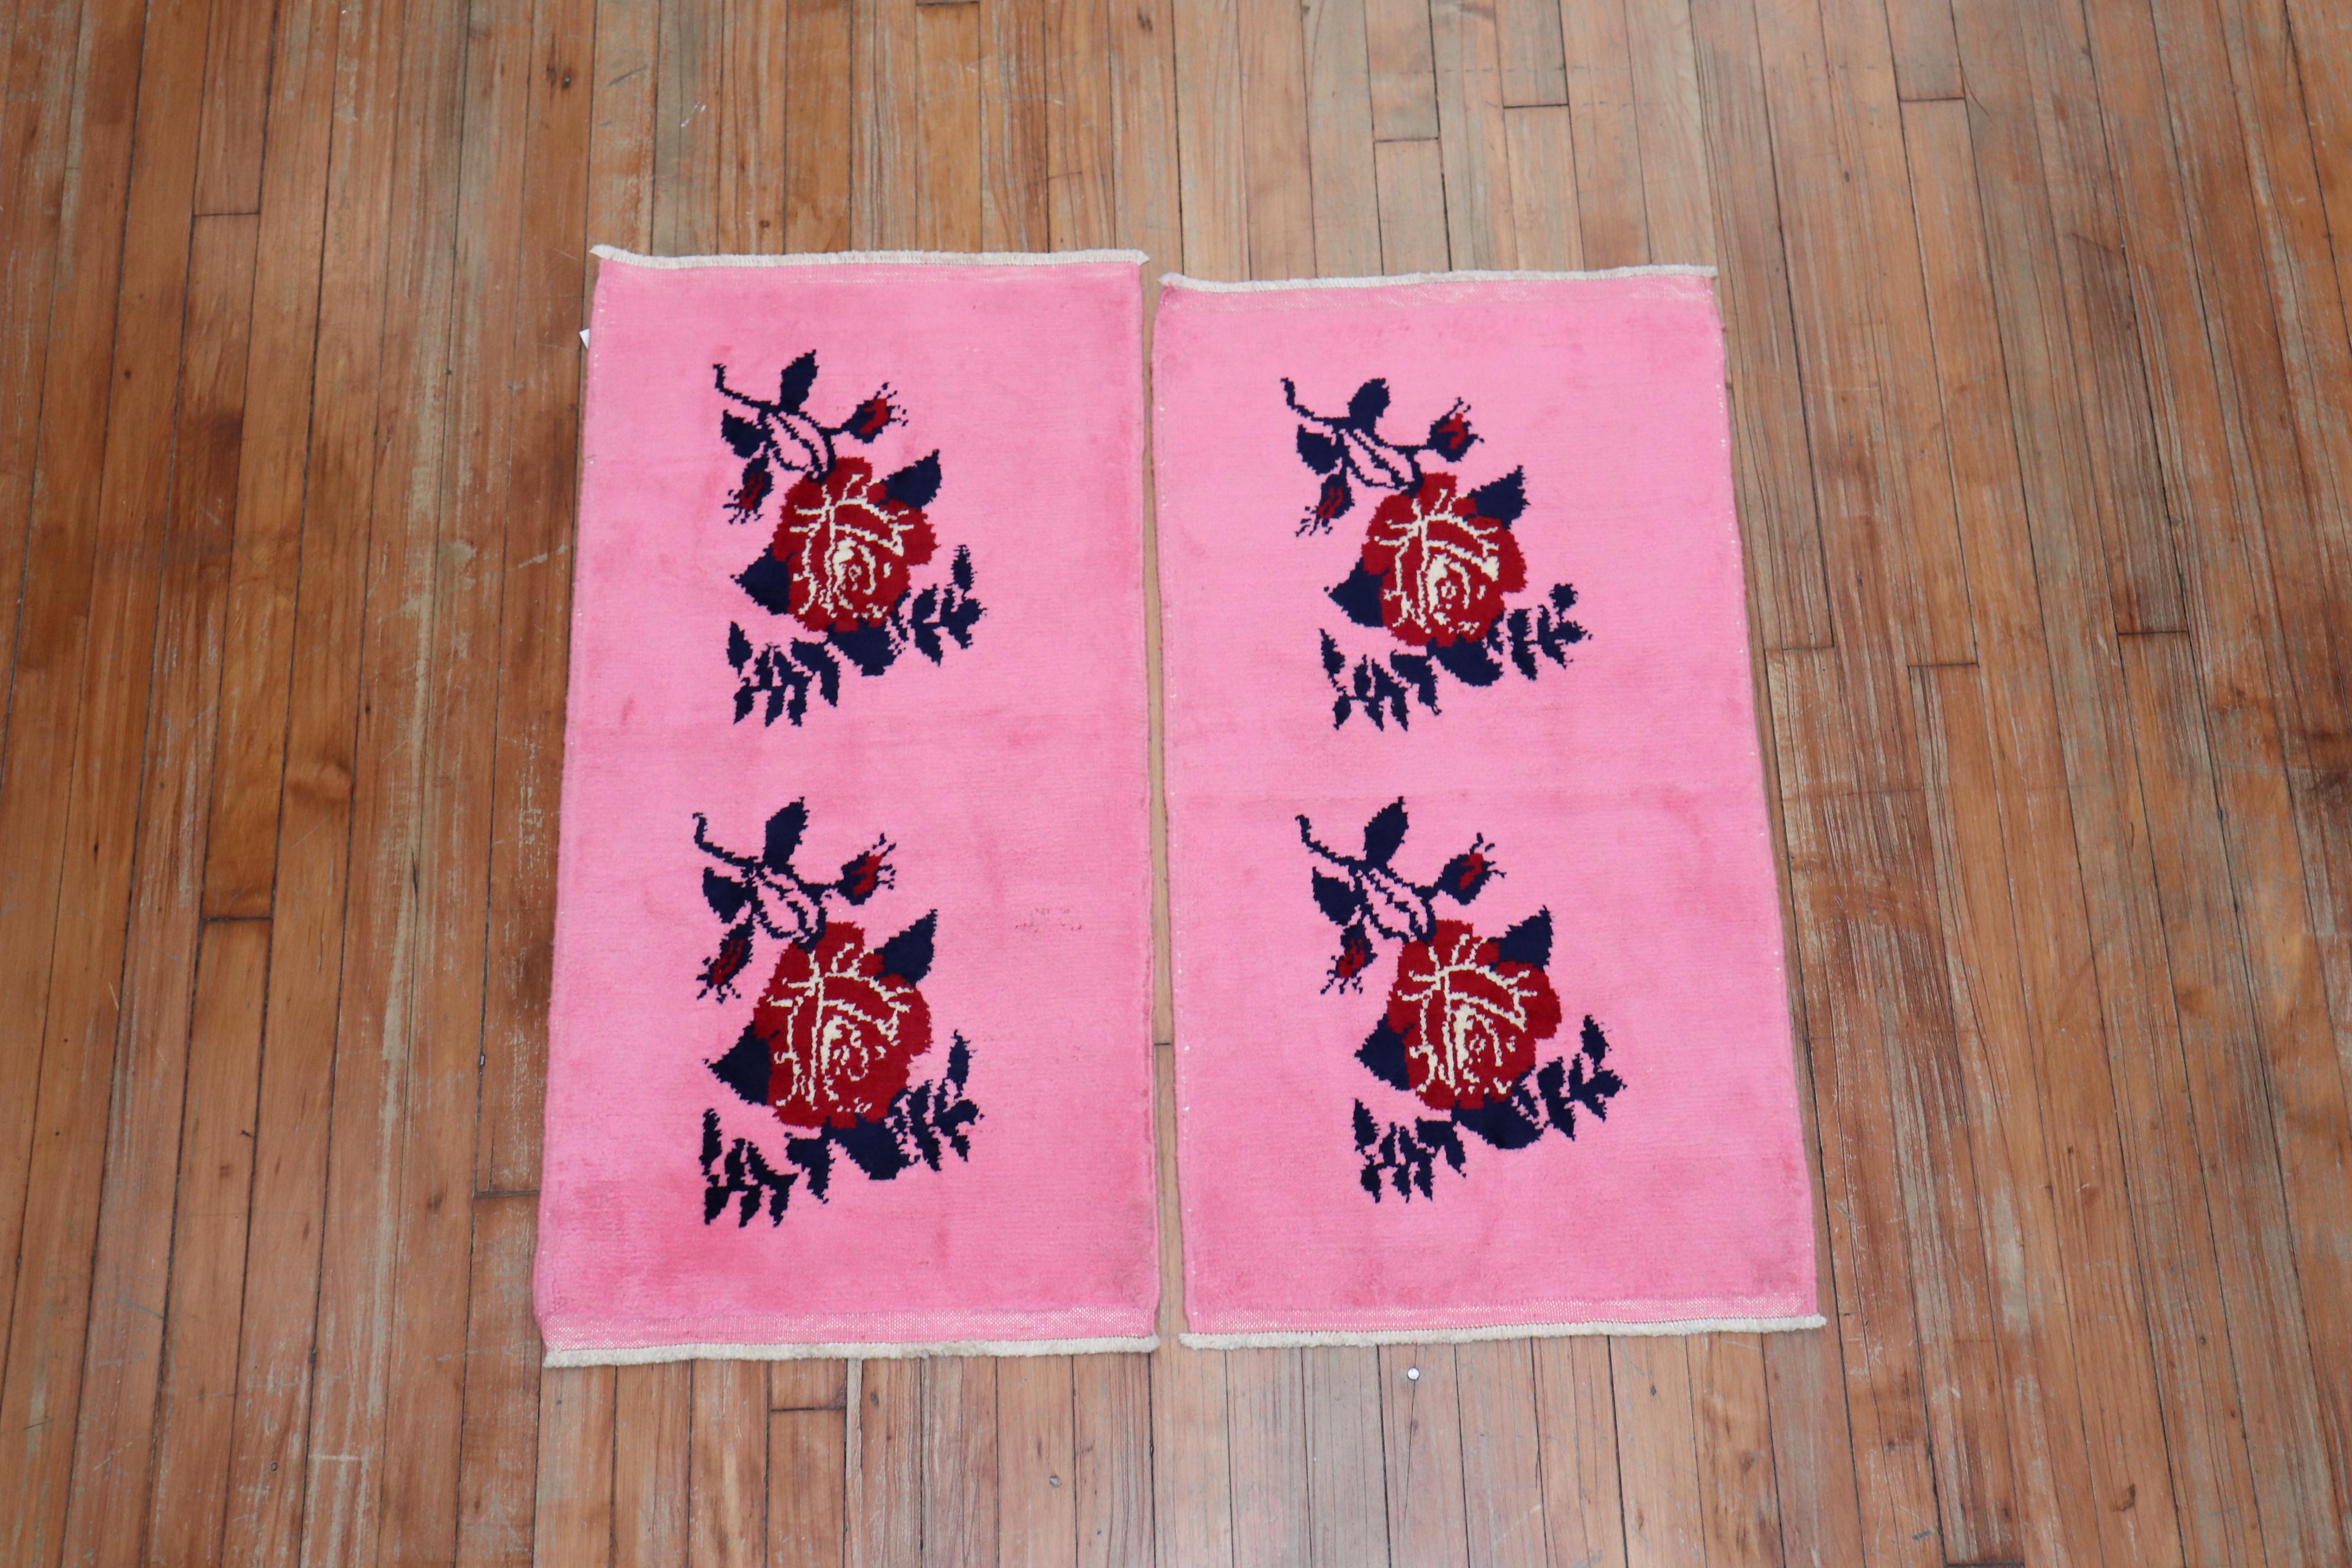 Hand-Knotted Bright Pink Floral Motif Vintage Turkish Rugs, Late 20th Century / Set of 2 For Sale